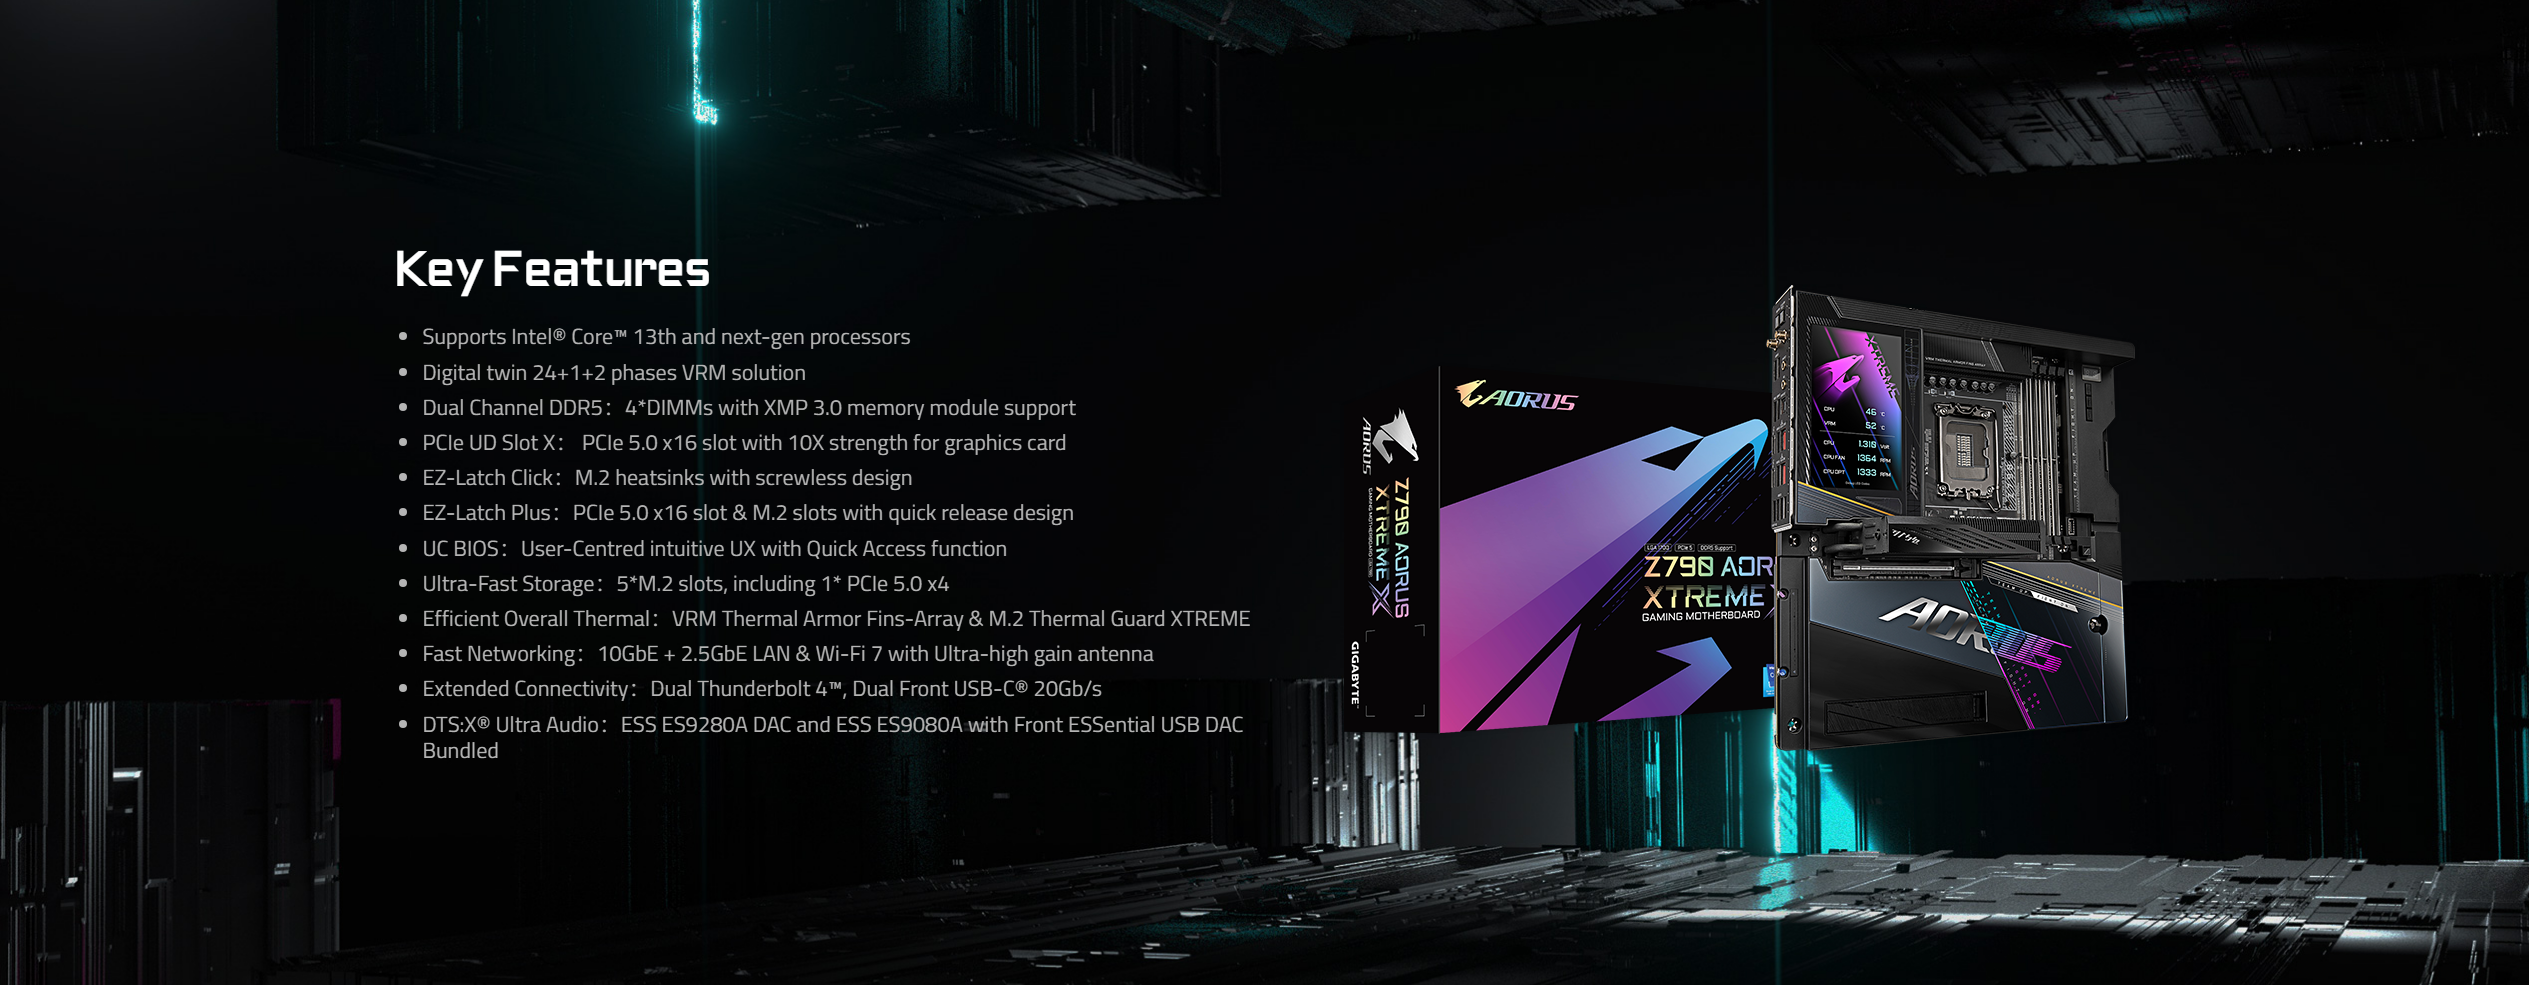 A large marketing image providing additional information about the product Gigabyte Z790 Aorus Xtreme X LGA1700 eATX Desktop Motherboard - Additional alt info not provided